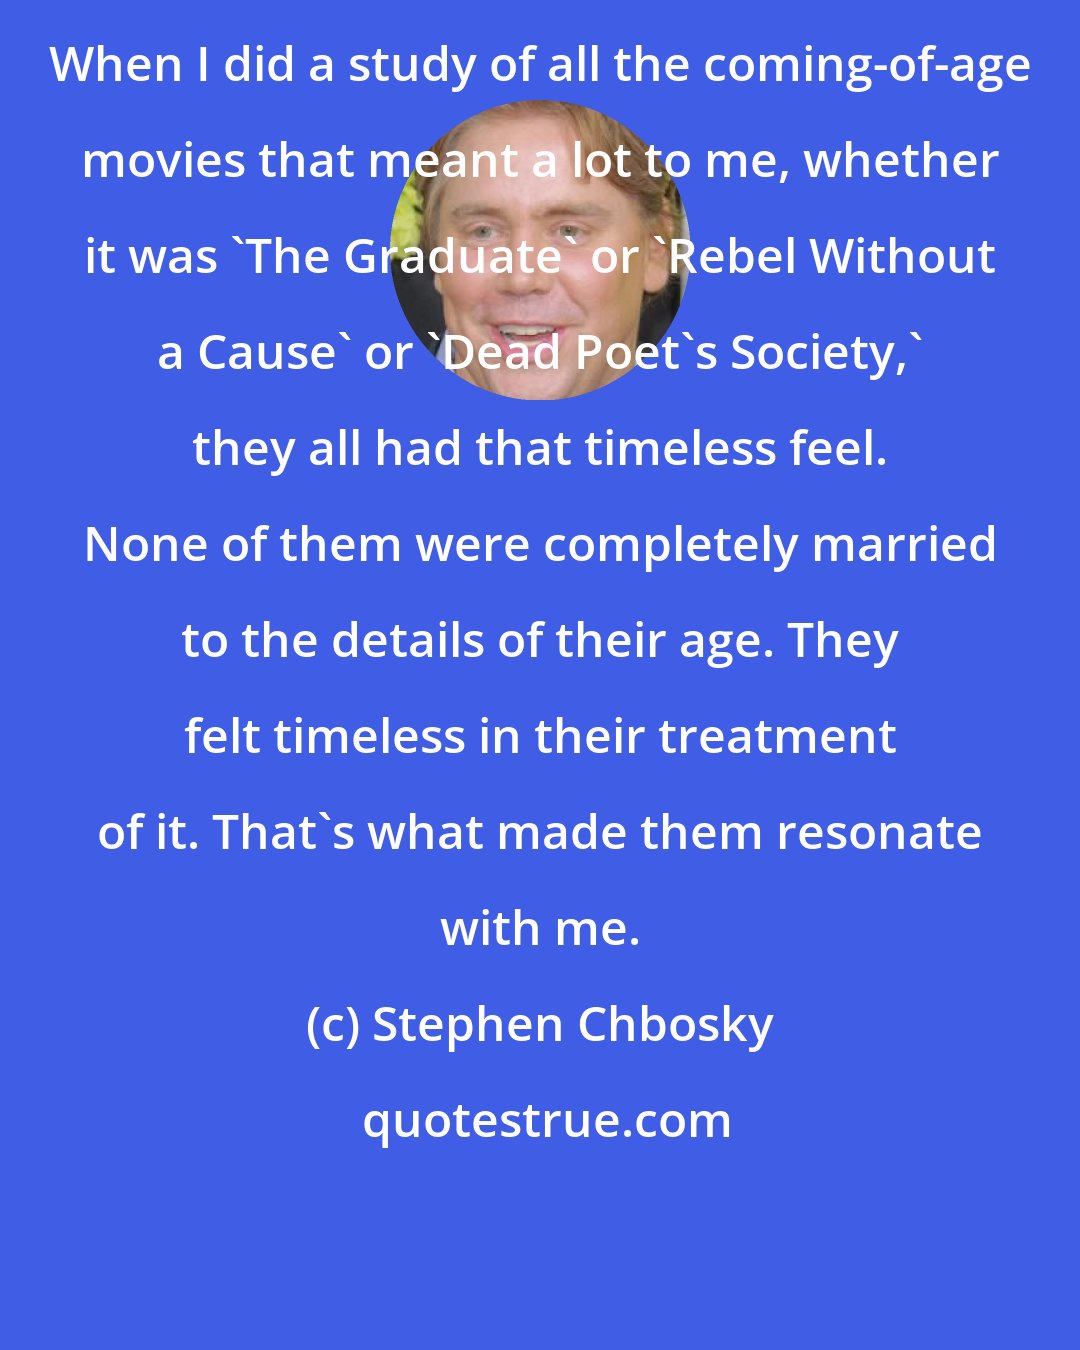 Stephen Chbosky: When I did a study of all the coming-of-age movies that meant a lot to me, whether it was 'The Graduate' or 'Rebel Without a Cause' or 'Dead Poet's Society,' they all had that timeless feel. None of them were completely married to the details of their age. They felt timeless in their treatment of it. That's what made them resonate with me.